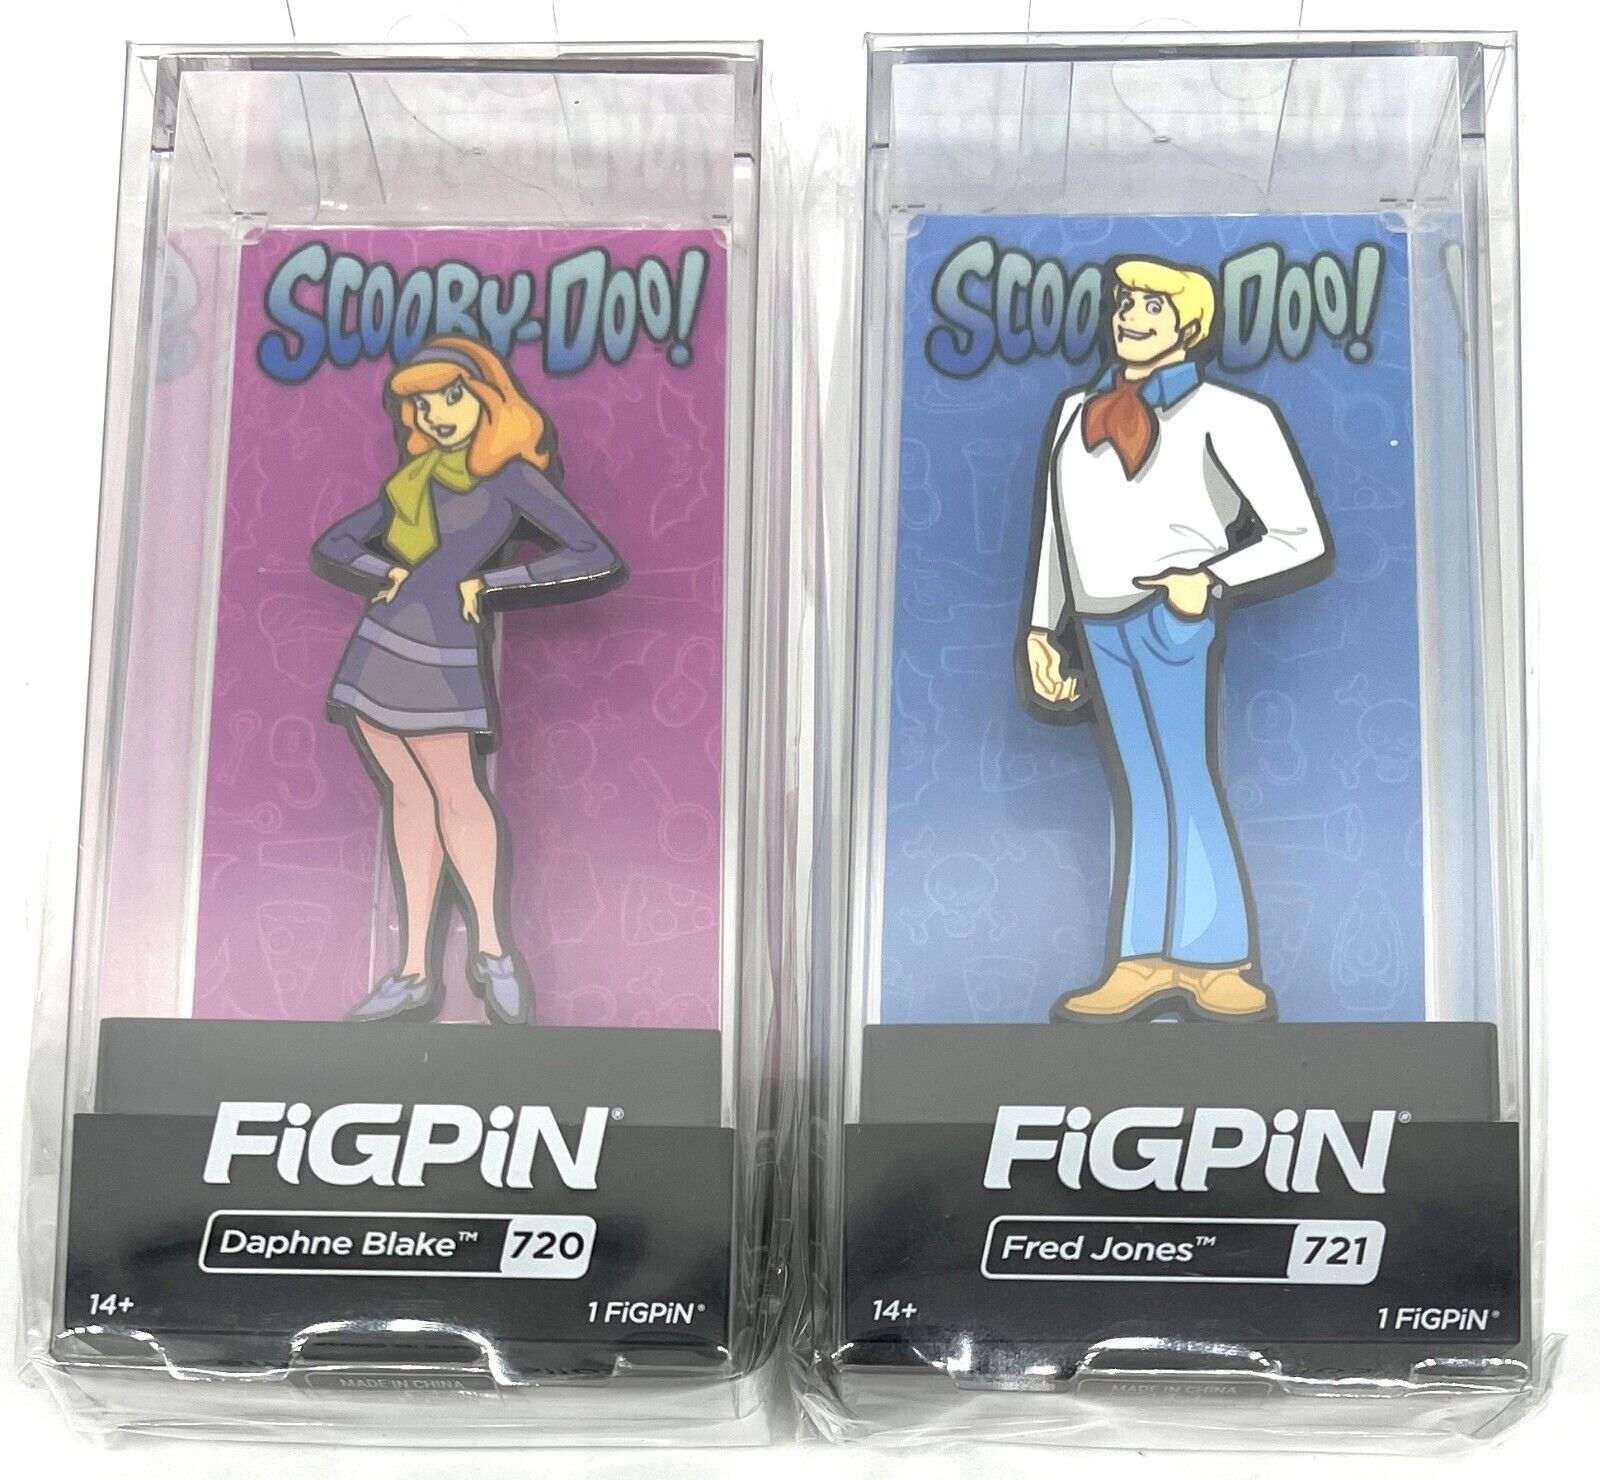 FiGPiN Scooby-Doo Daphne Blake #720 & Fred Jones #721 Collectible Pins Set of 2